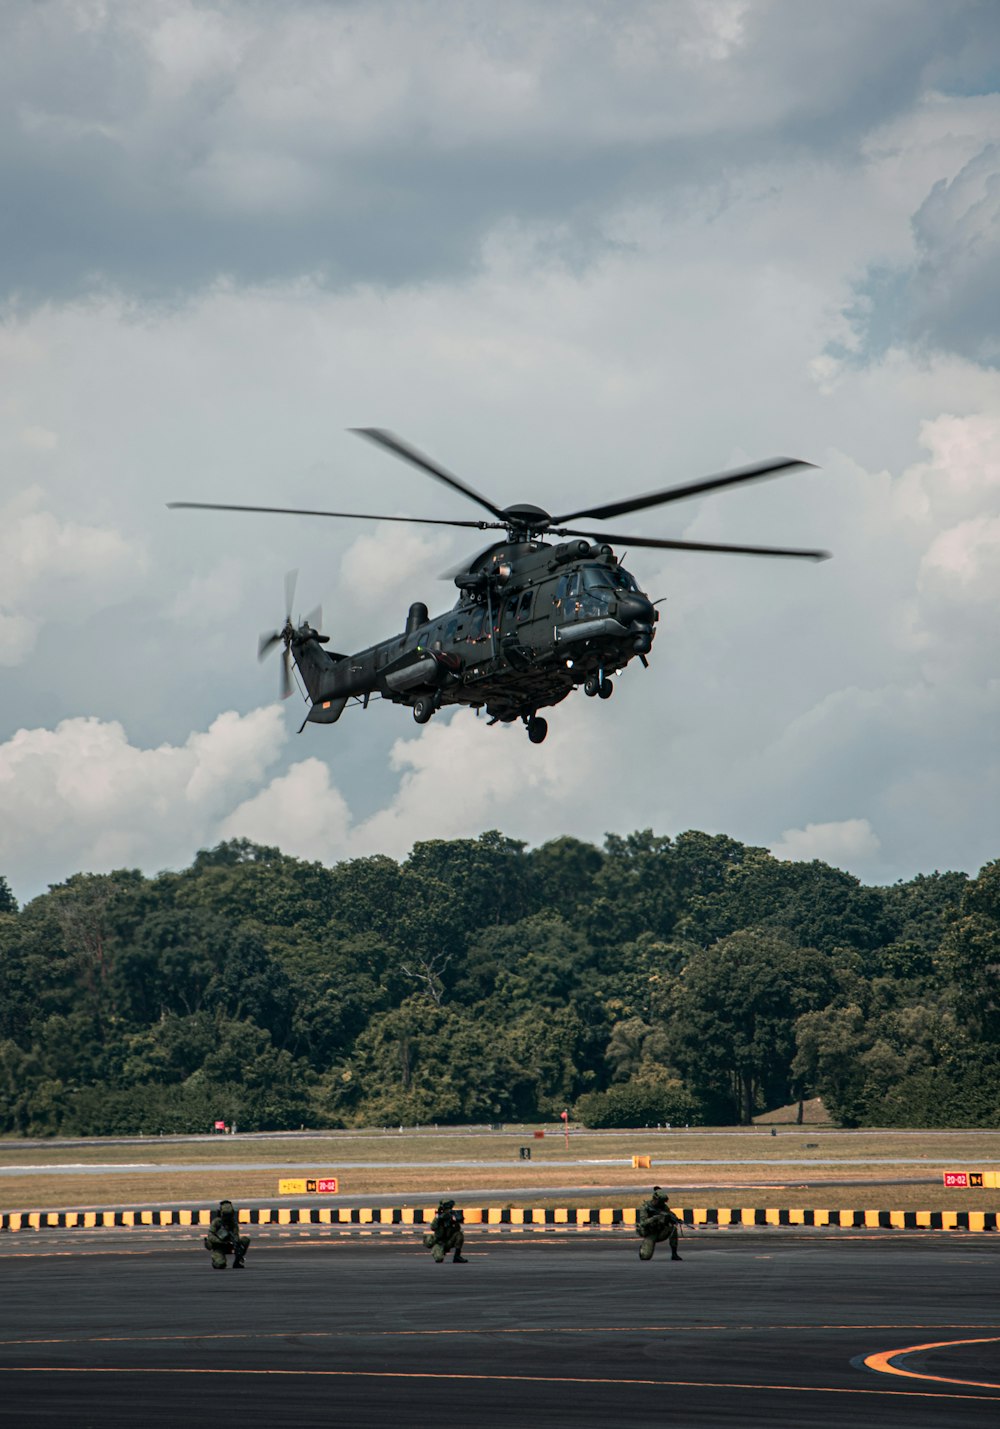 a helicopter is flying low over a runway